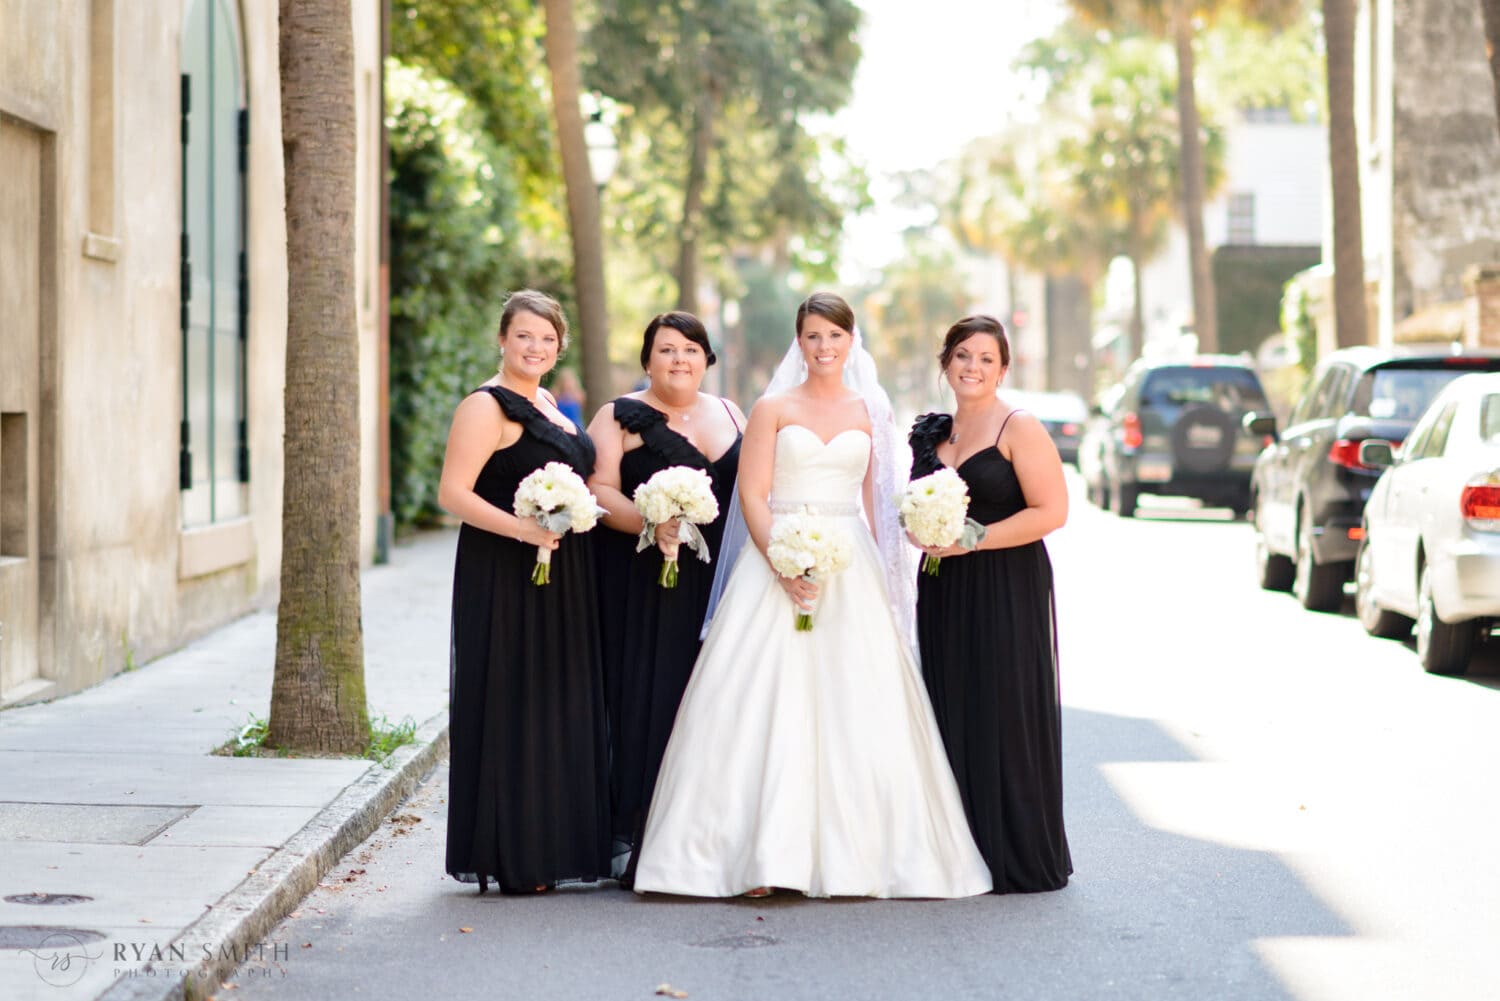 Bride and bridesmaids standing in the street - Downtown Charleston, SC